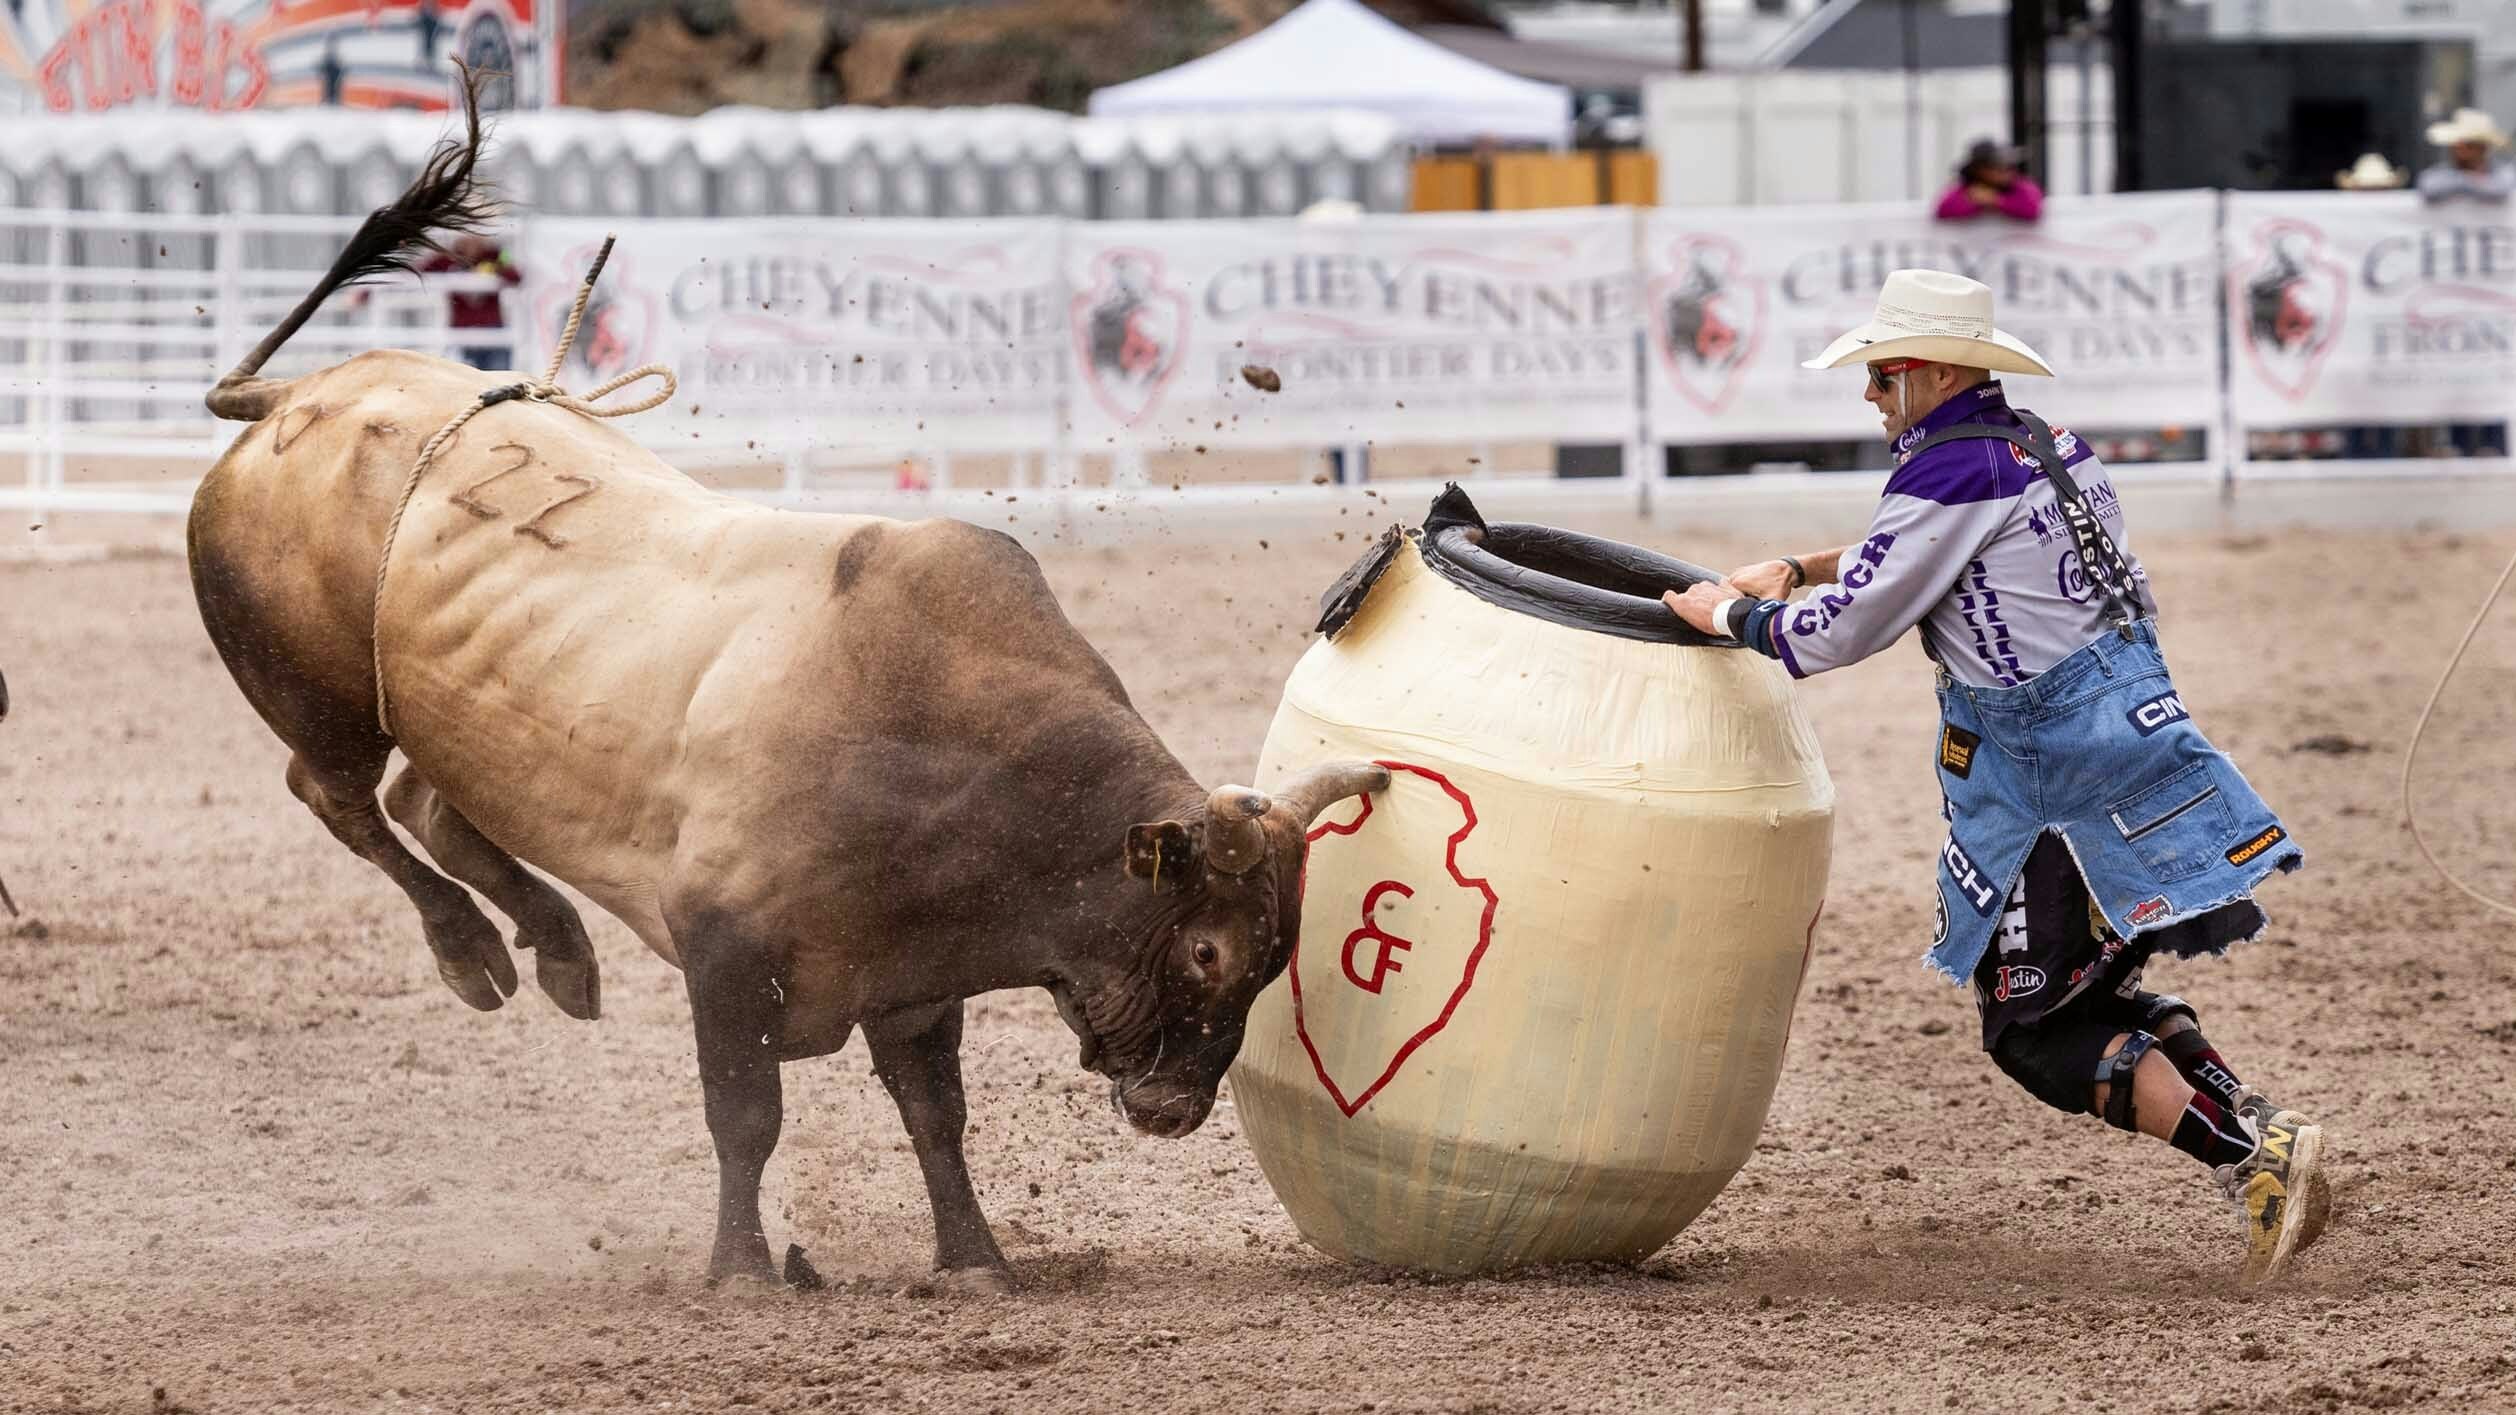 Bullfighter Dusty Tackness from Meeteetse, Wyoming fights a bull during the bull riding at Cheyenne Frontier Days on July 23, 2023.